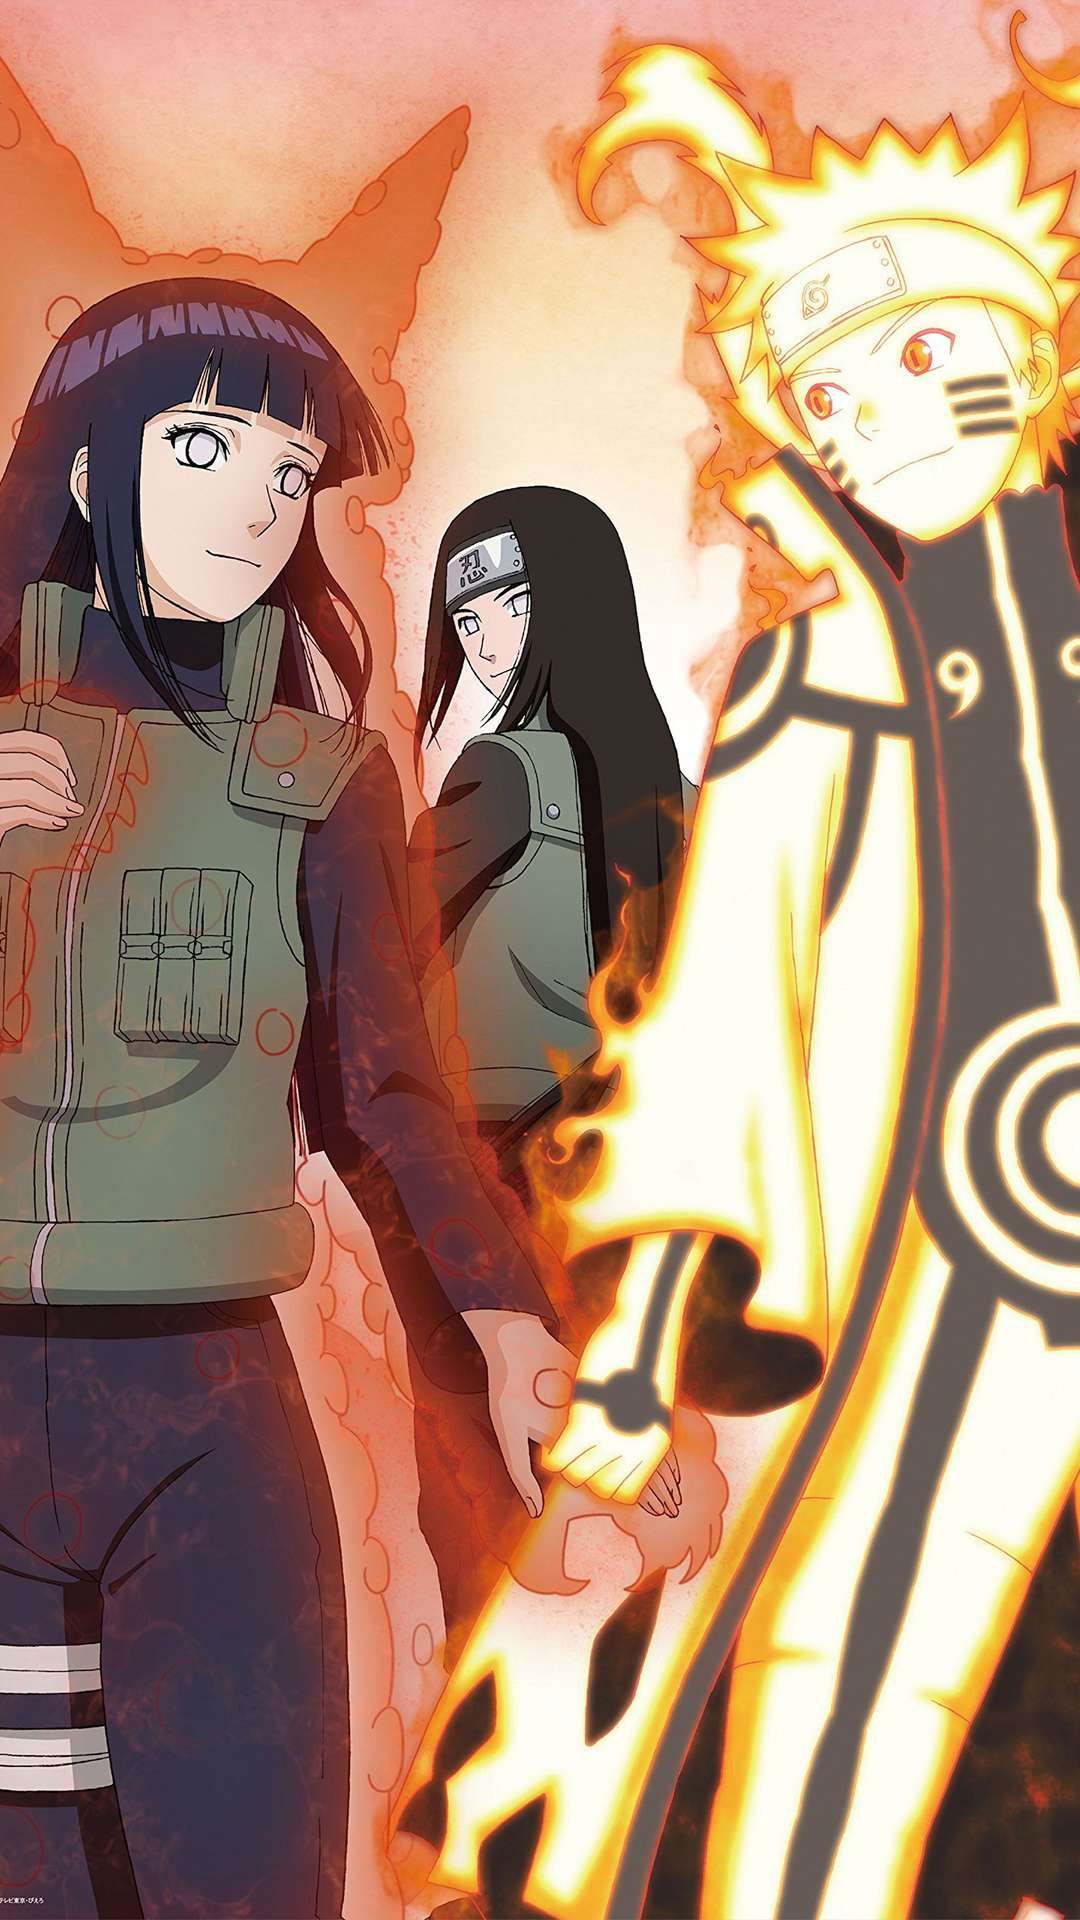 NaruHina wallpaper by drippypaths - Download on ZEDGE™ | c68c